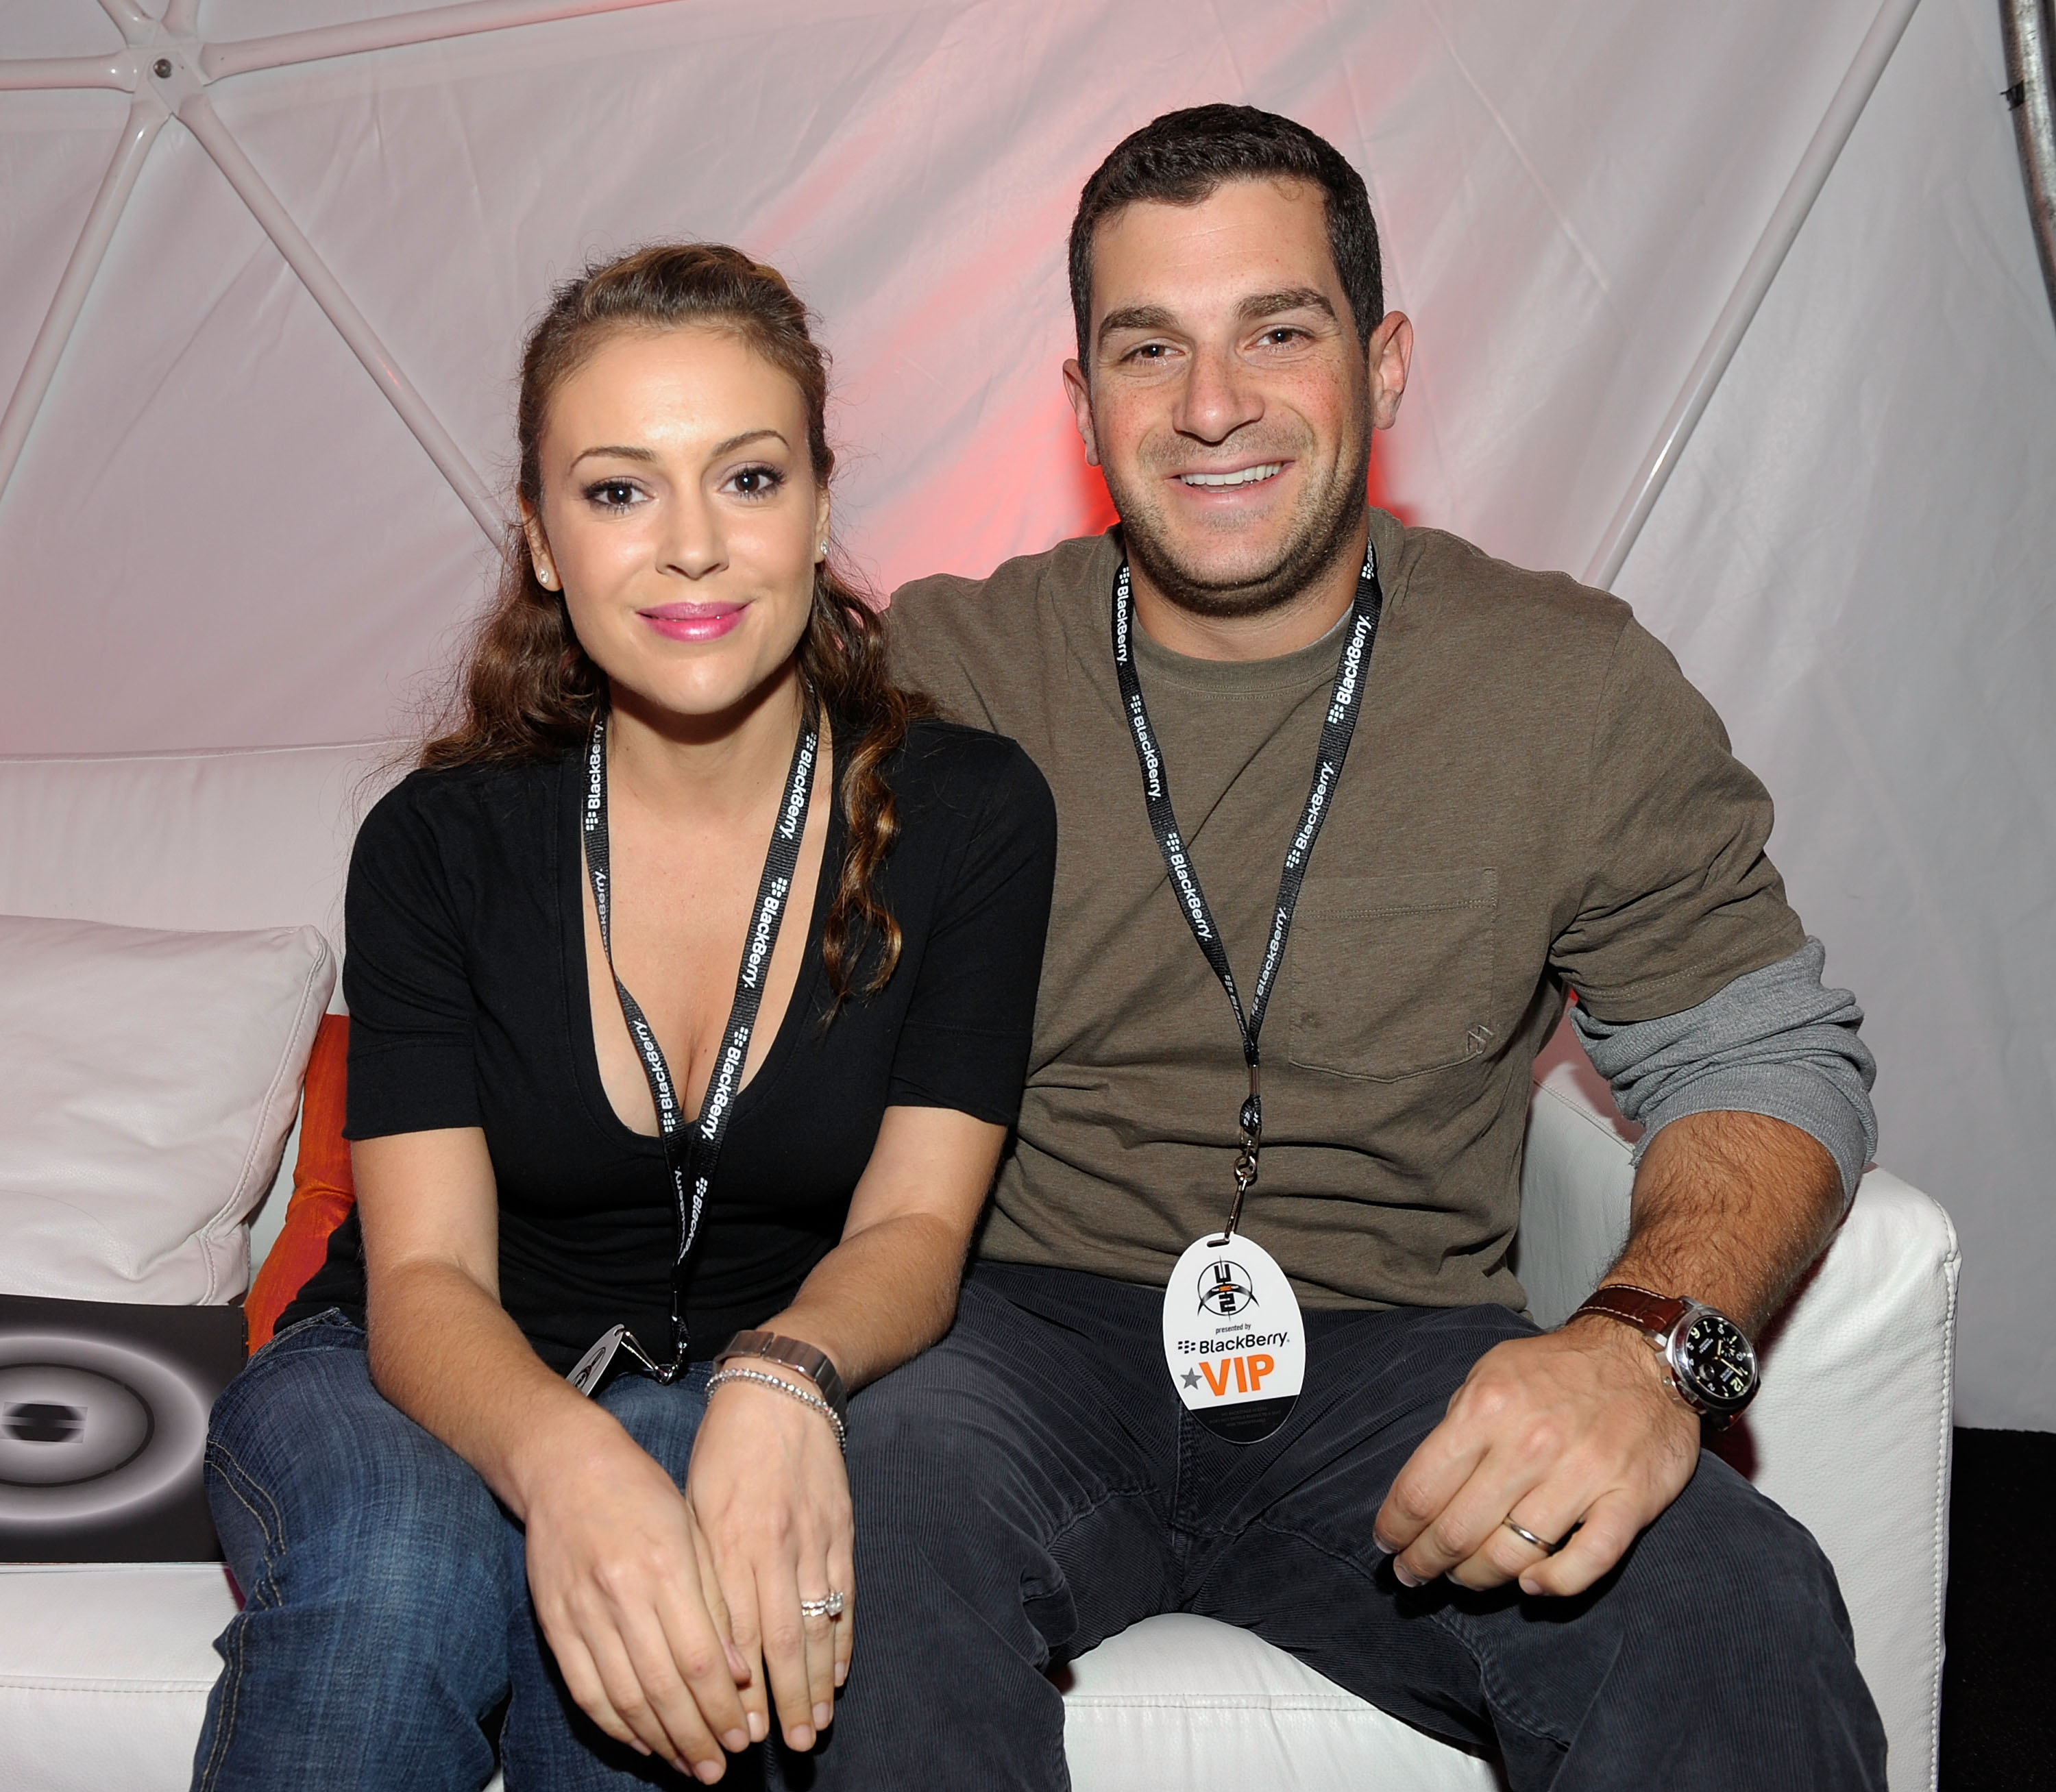 Alyssa Milano and David Bugliari at the BlackBerry VIP Hospitality Lounge at the U2 Concert on October 25, 2009 at the Rose Bowl in Pasadena, California | Source: Getty Images